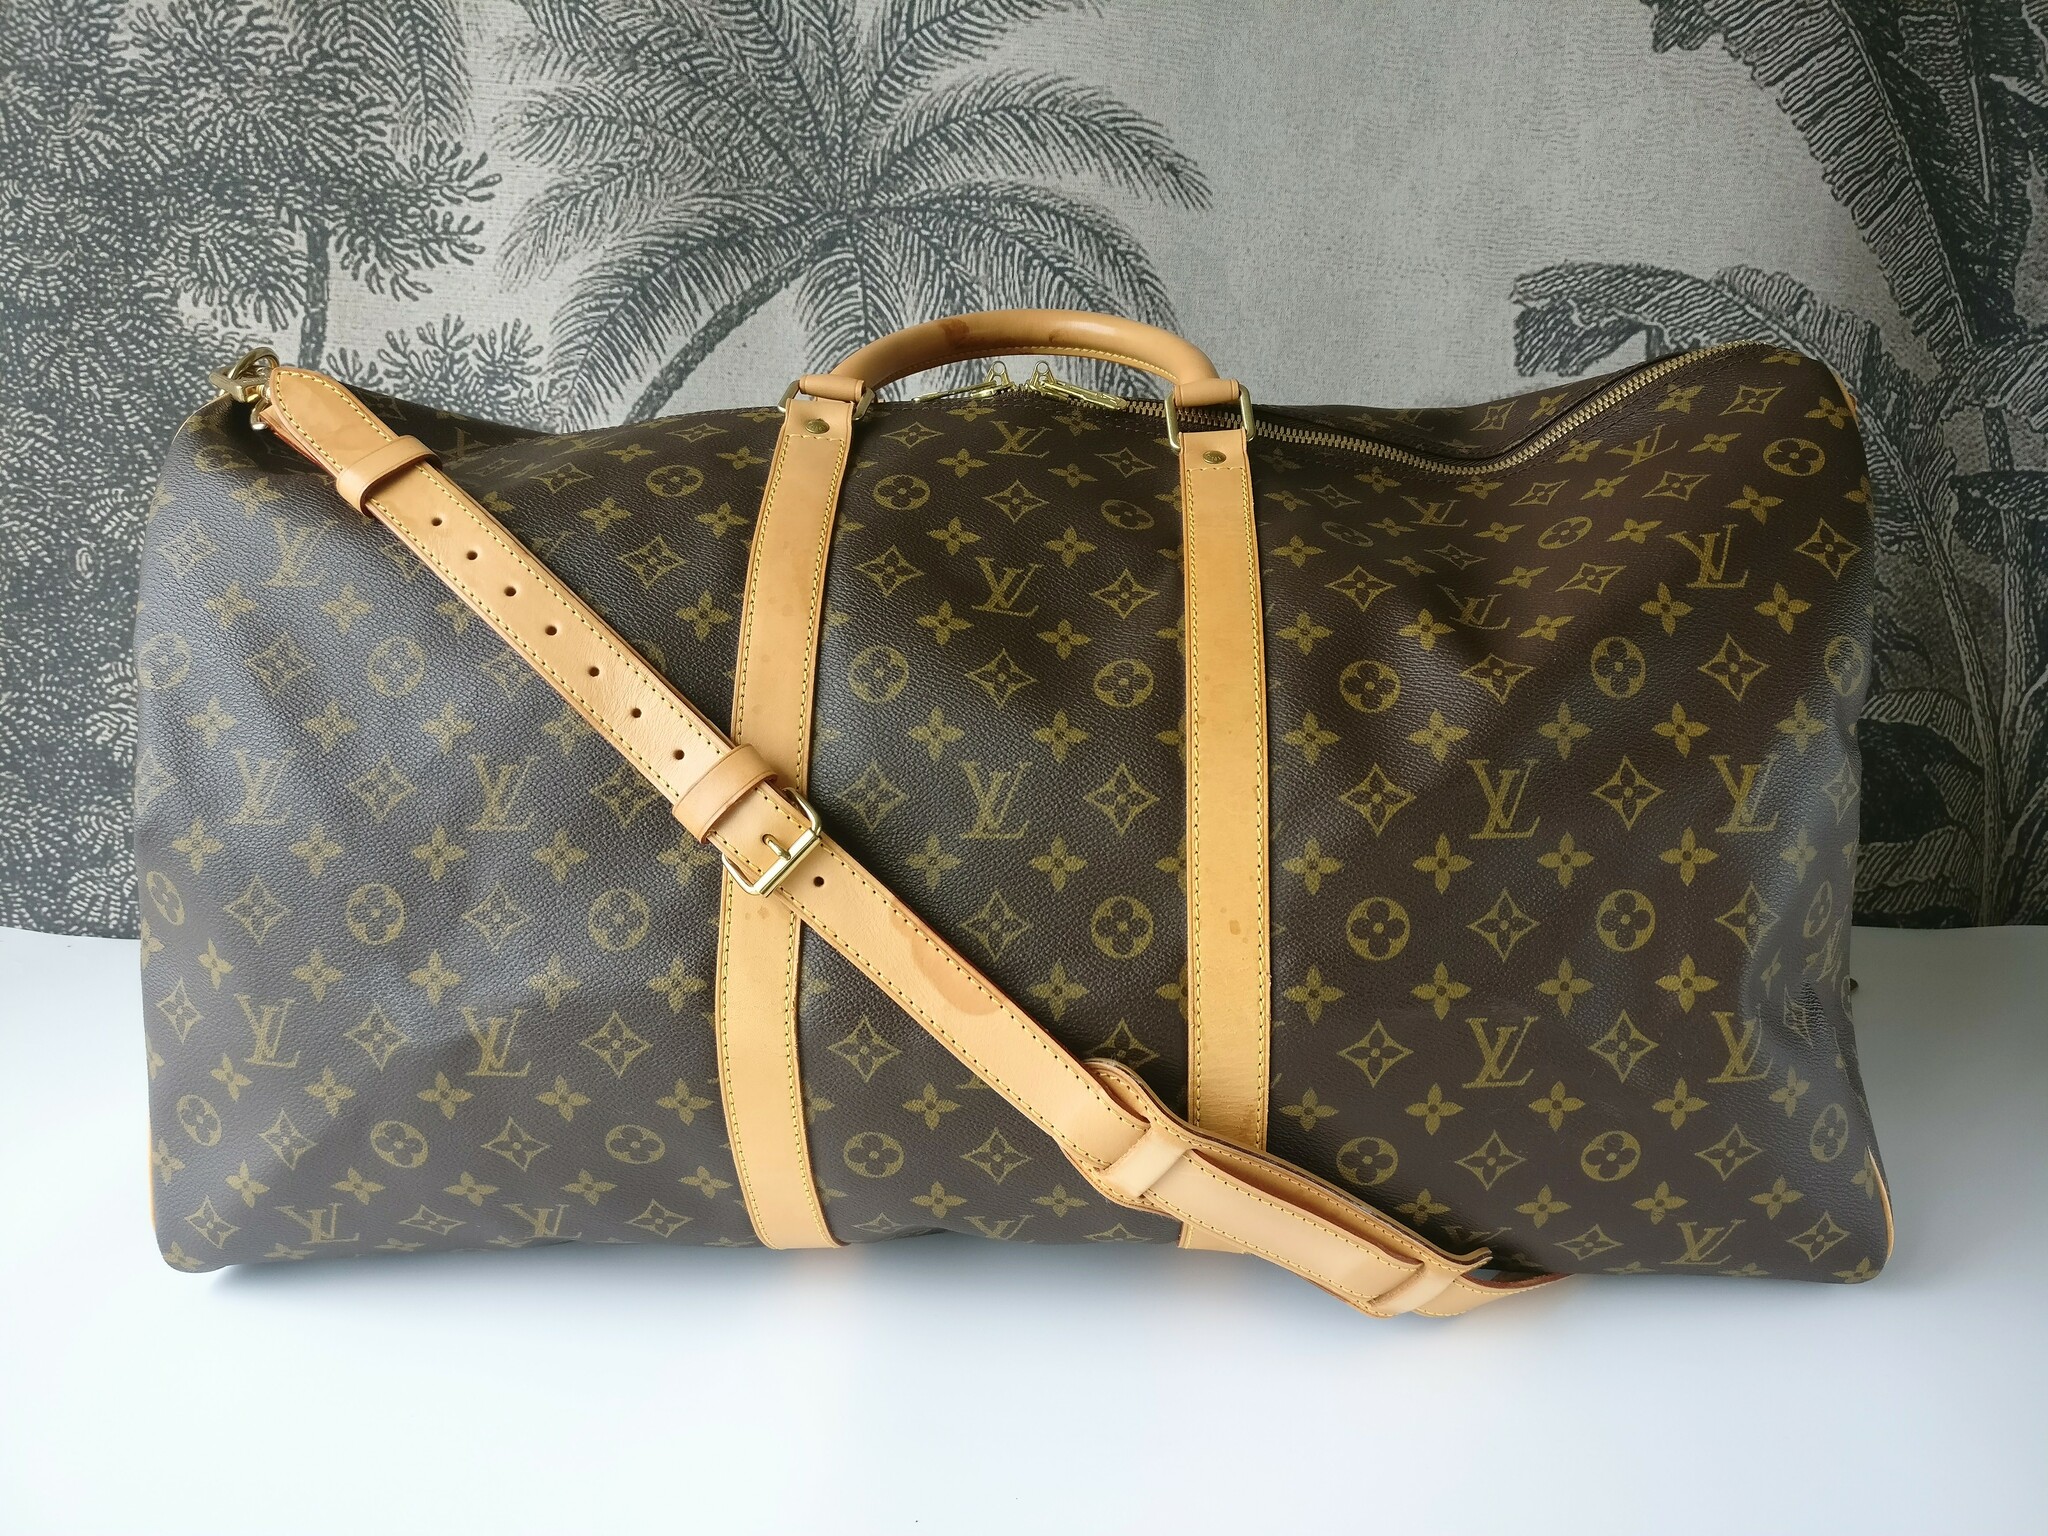 Louis Vuitton Keepall Bandouliere 60 - Good or Bag